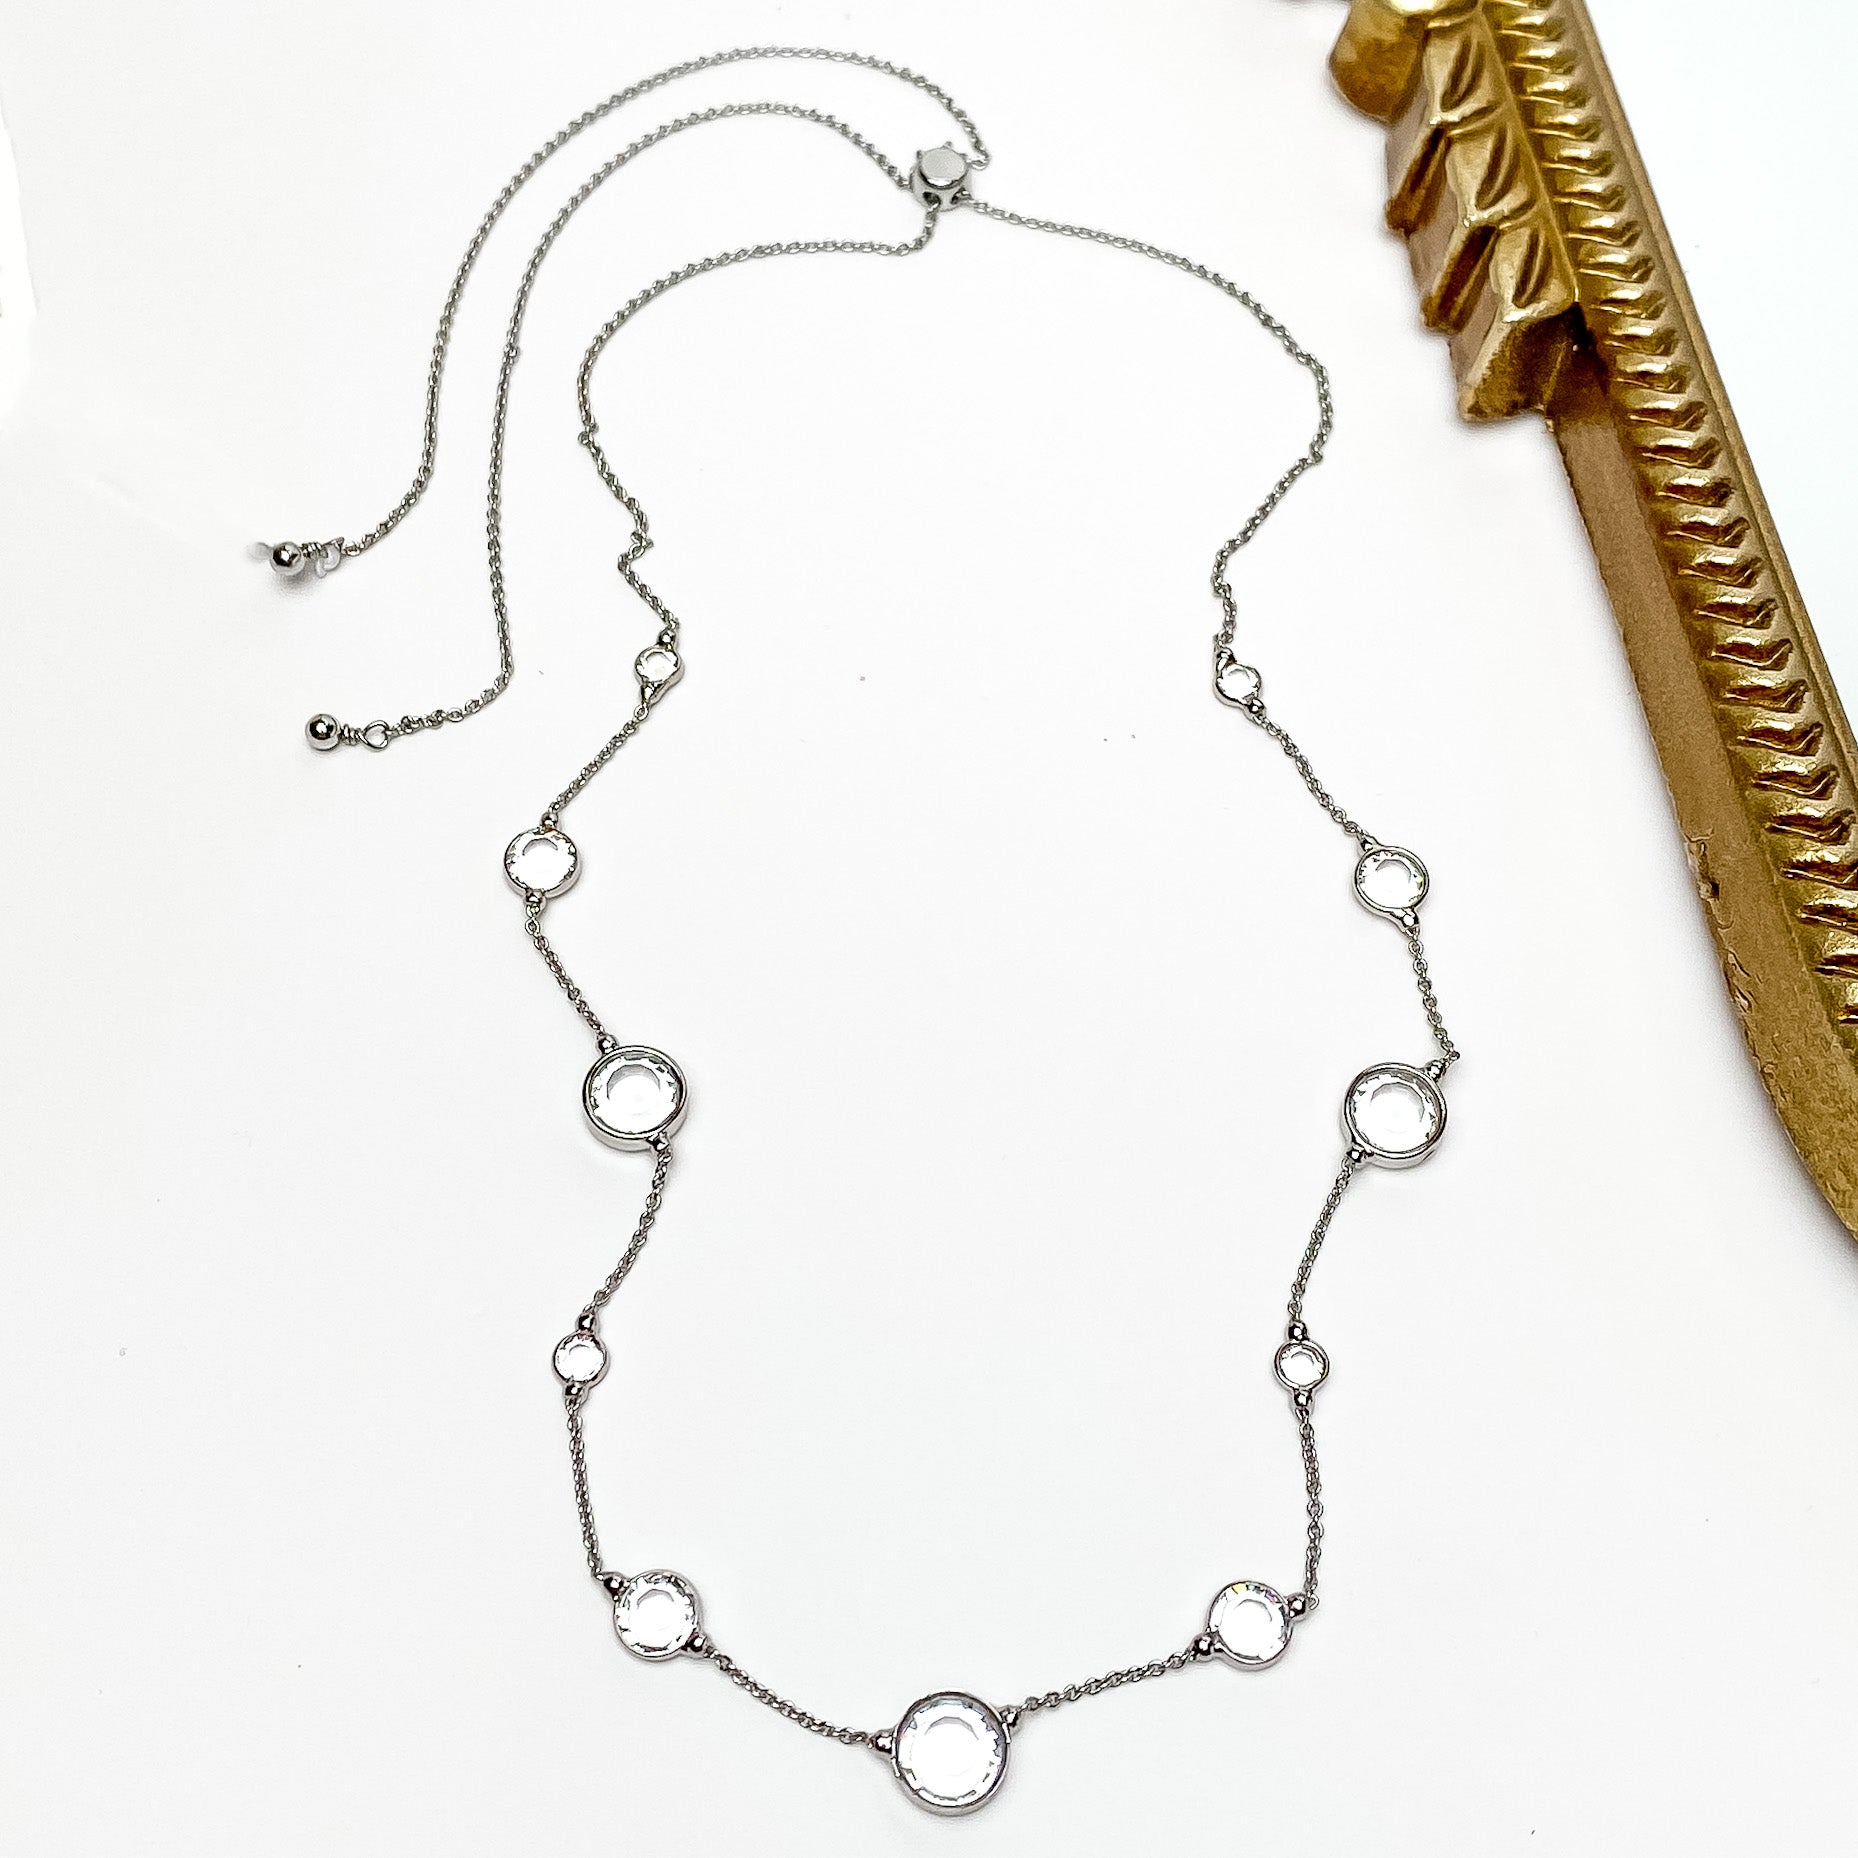 Pictured is a thin, silver chain with spaced out circle clear crystals. These crystals also come in different sizes. This necklace is pictured on a white background with a gold mirror to the right of the necklace.    